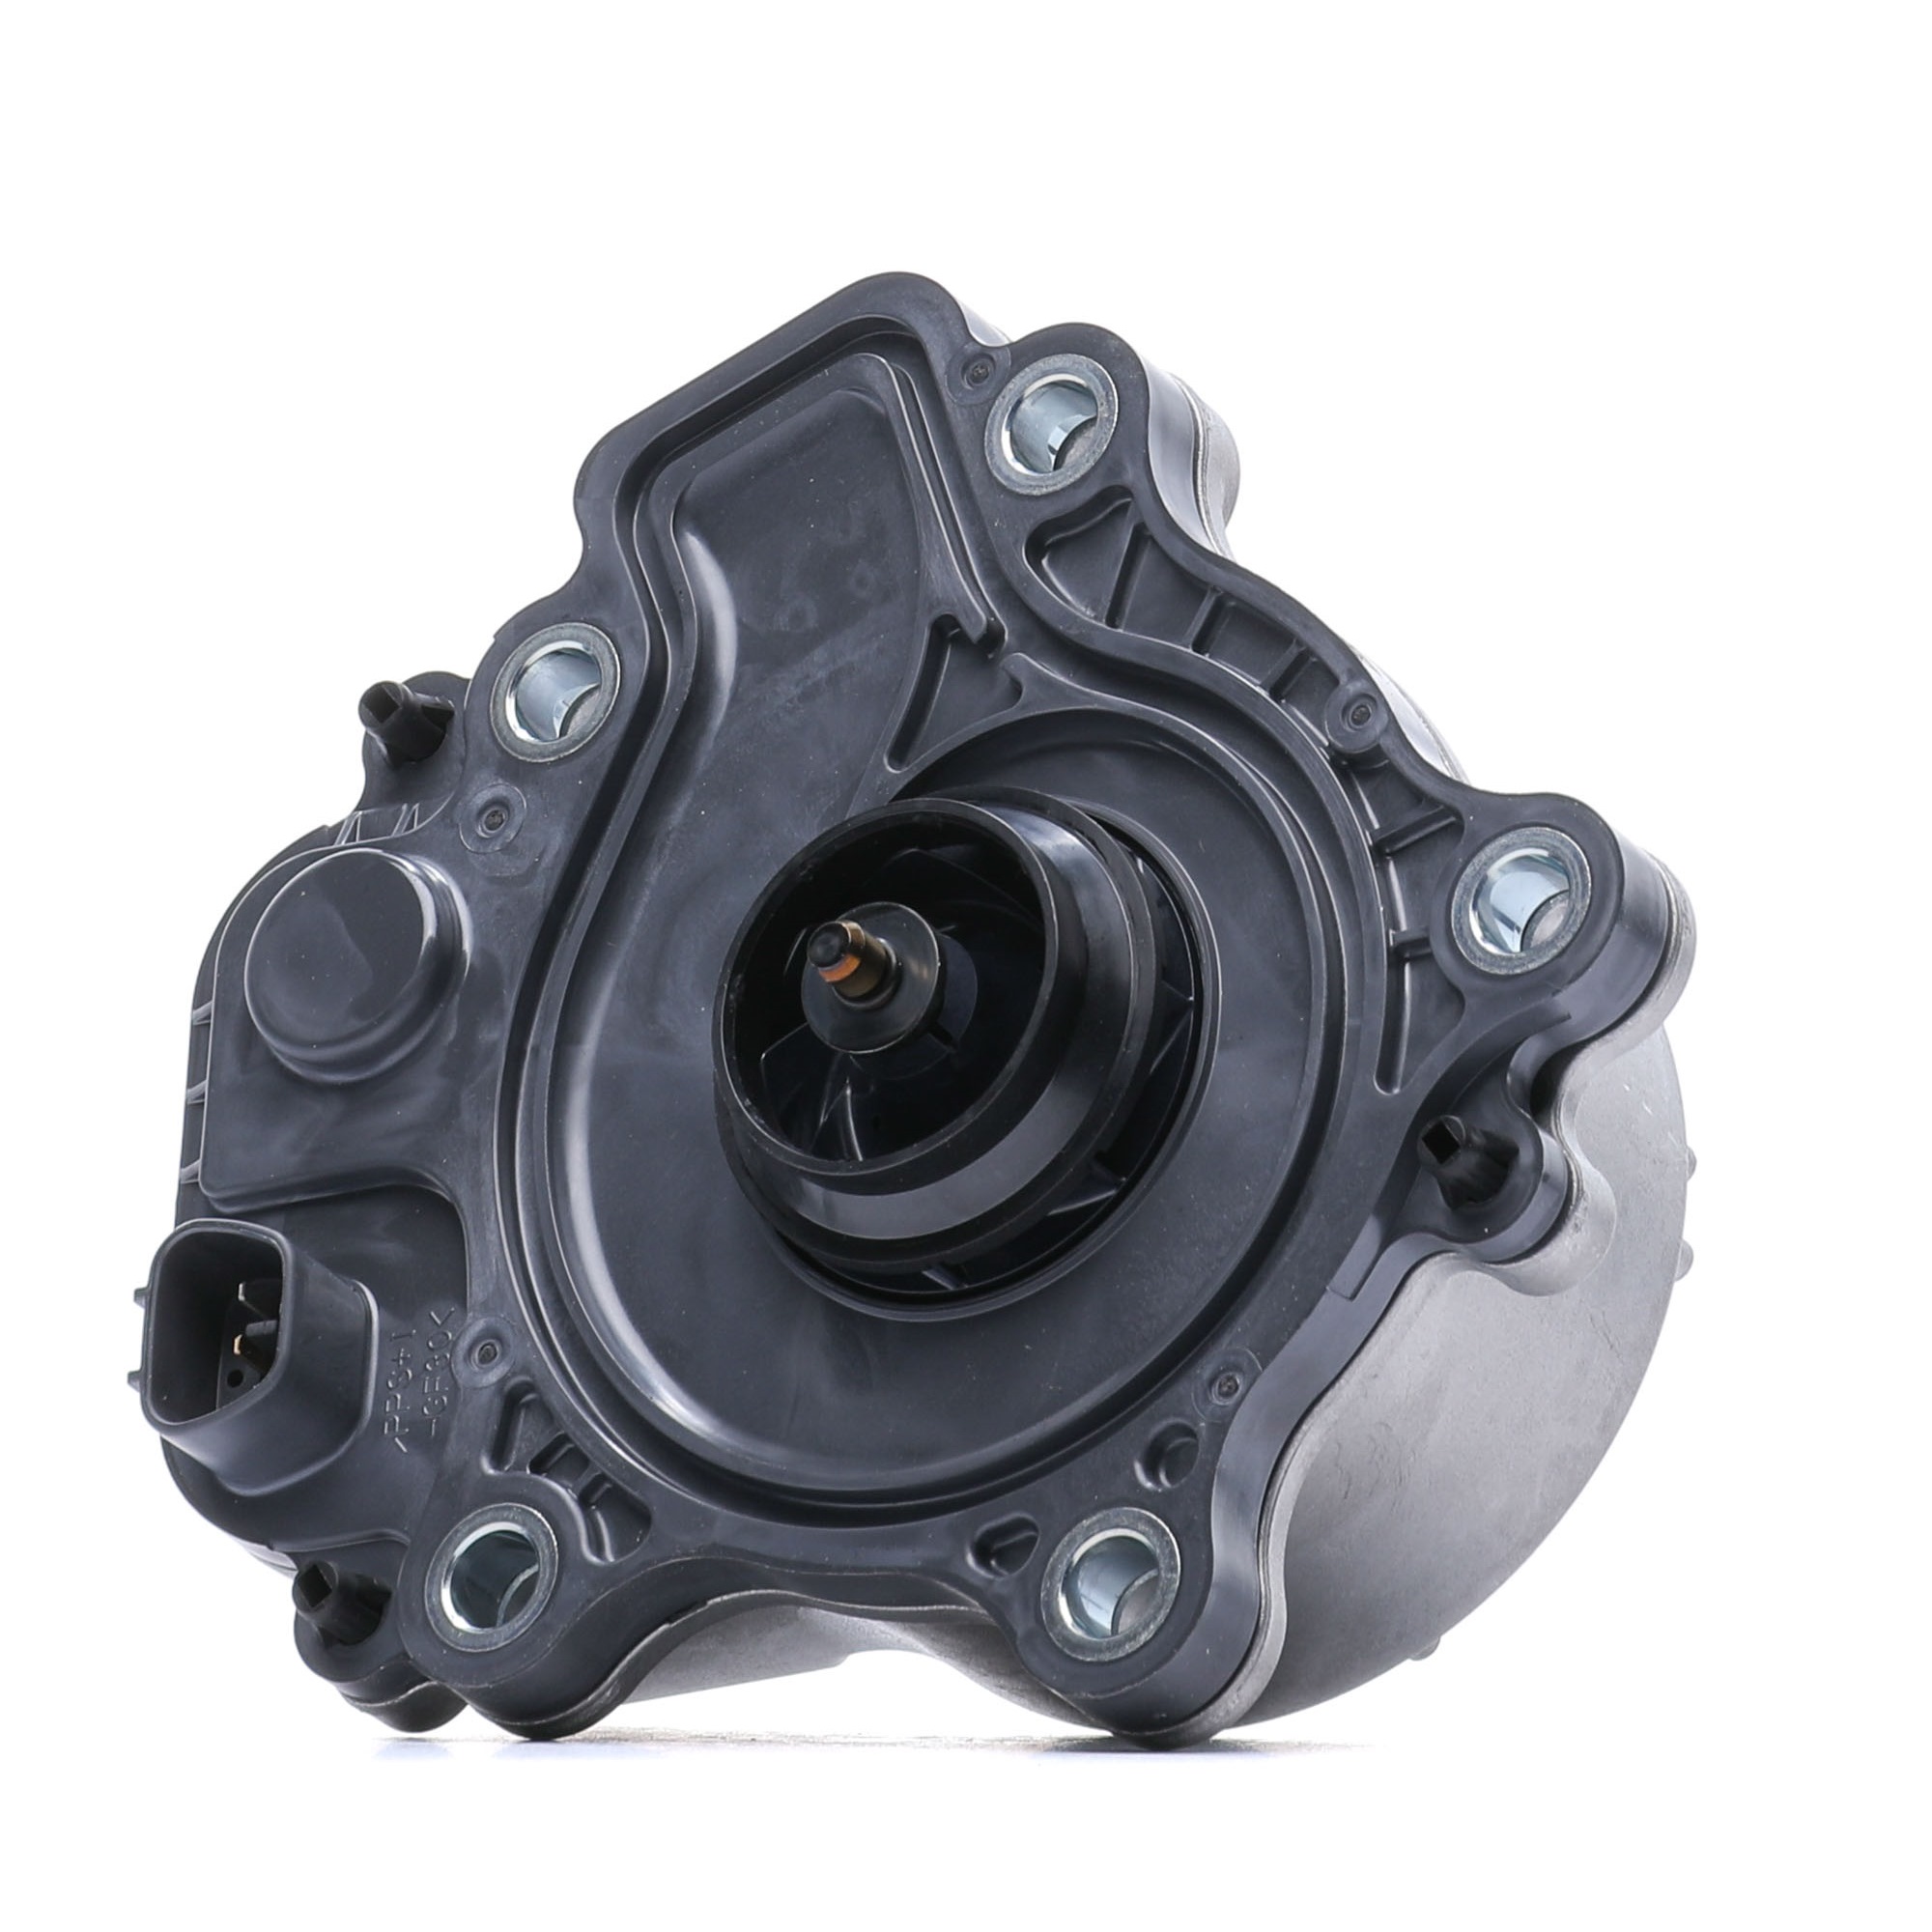 Image of AISIN Water pump TOYOTA,LEXUS WPT-190A 161A029015,161A039015,161A021010 Engine water pump,Water pump for engine 161A029015,161A039015